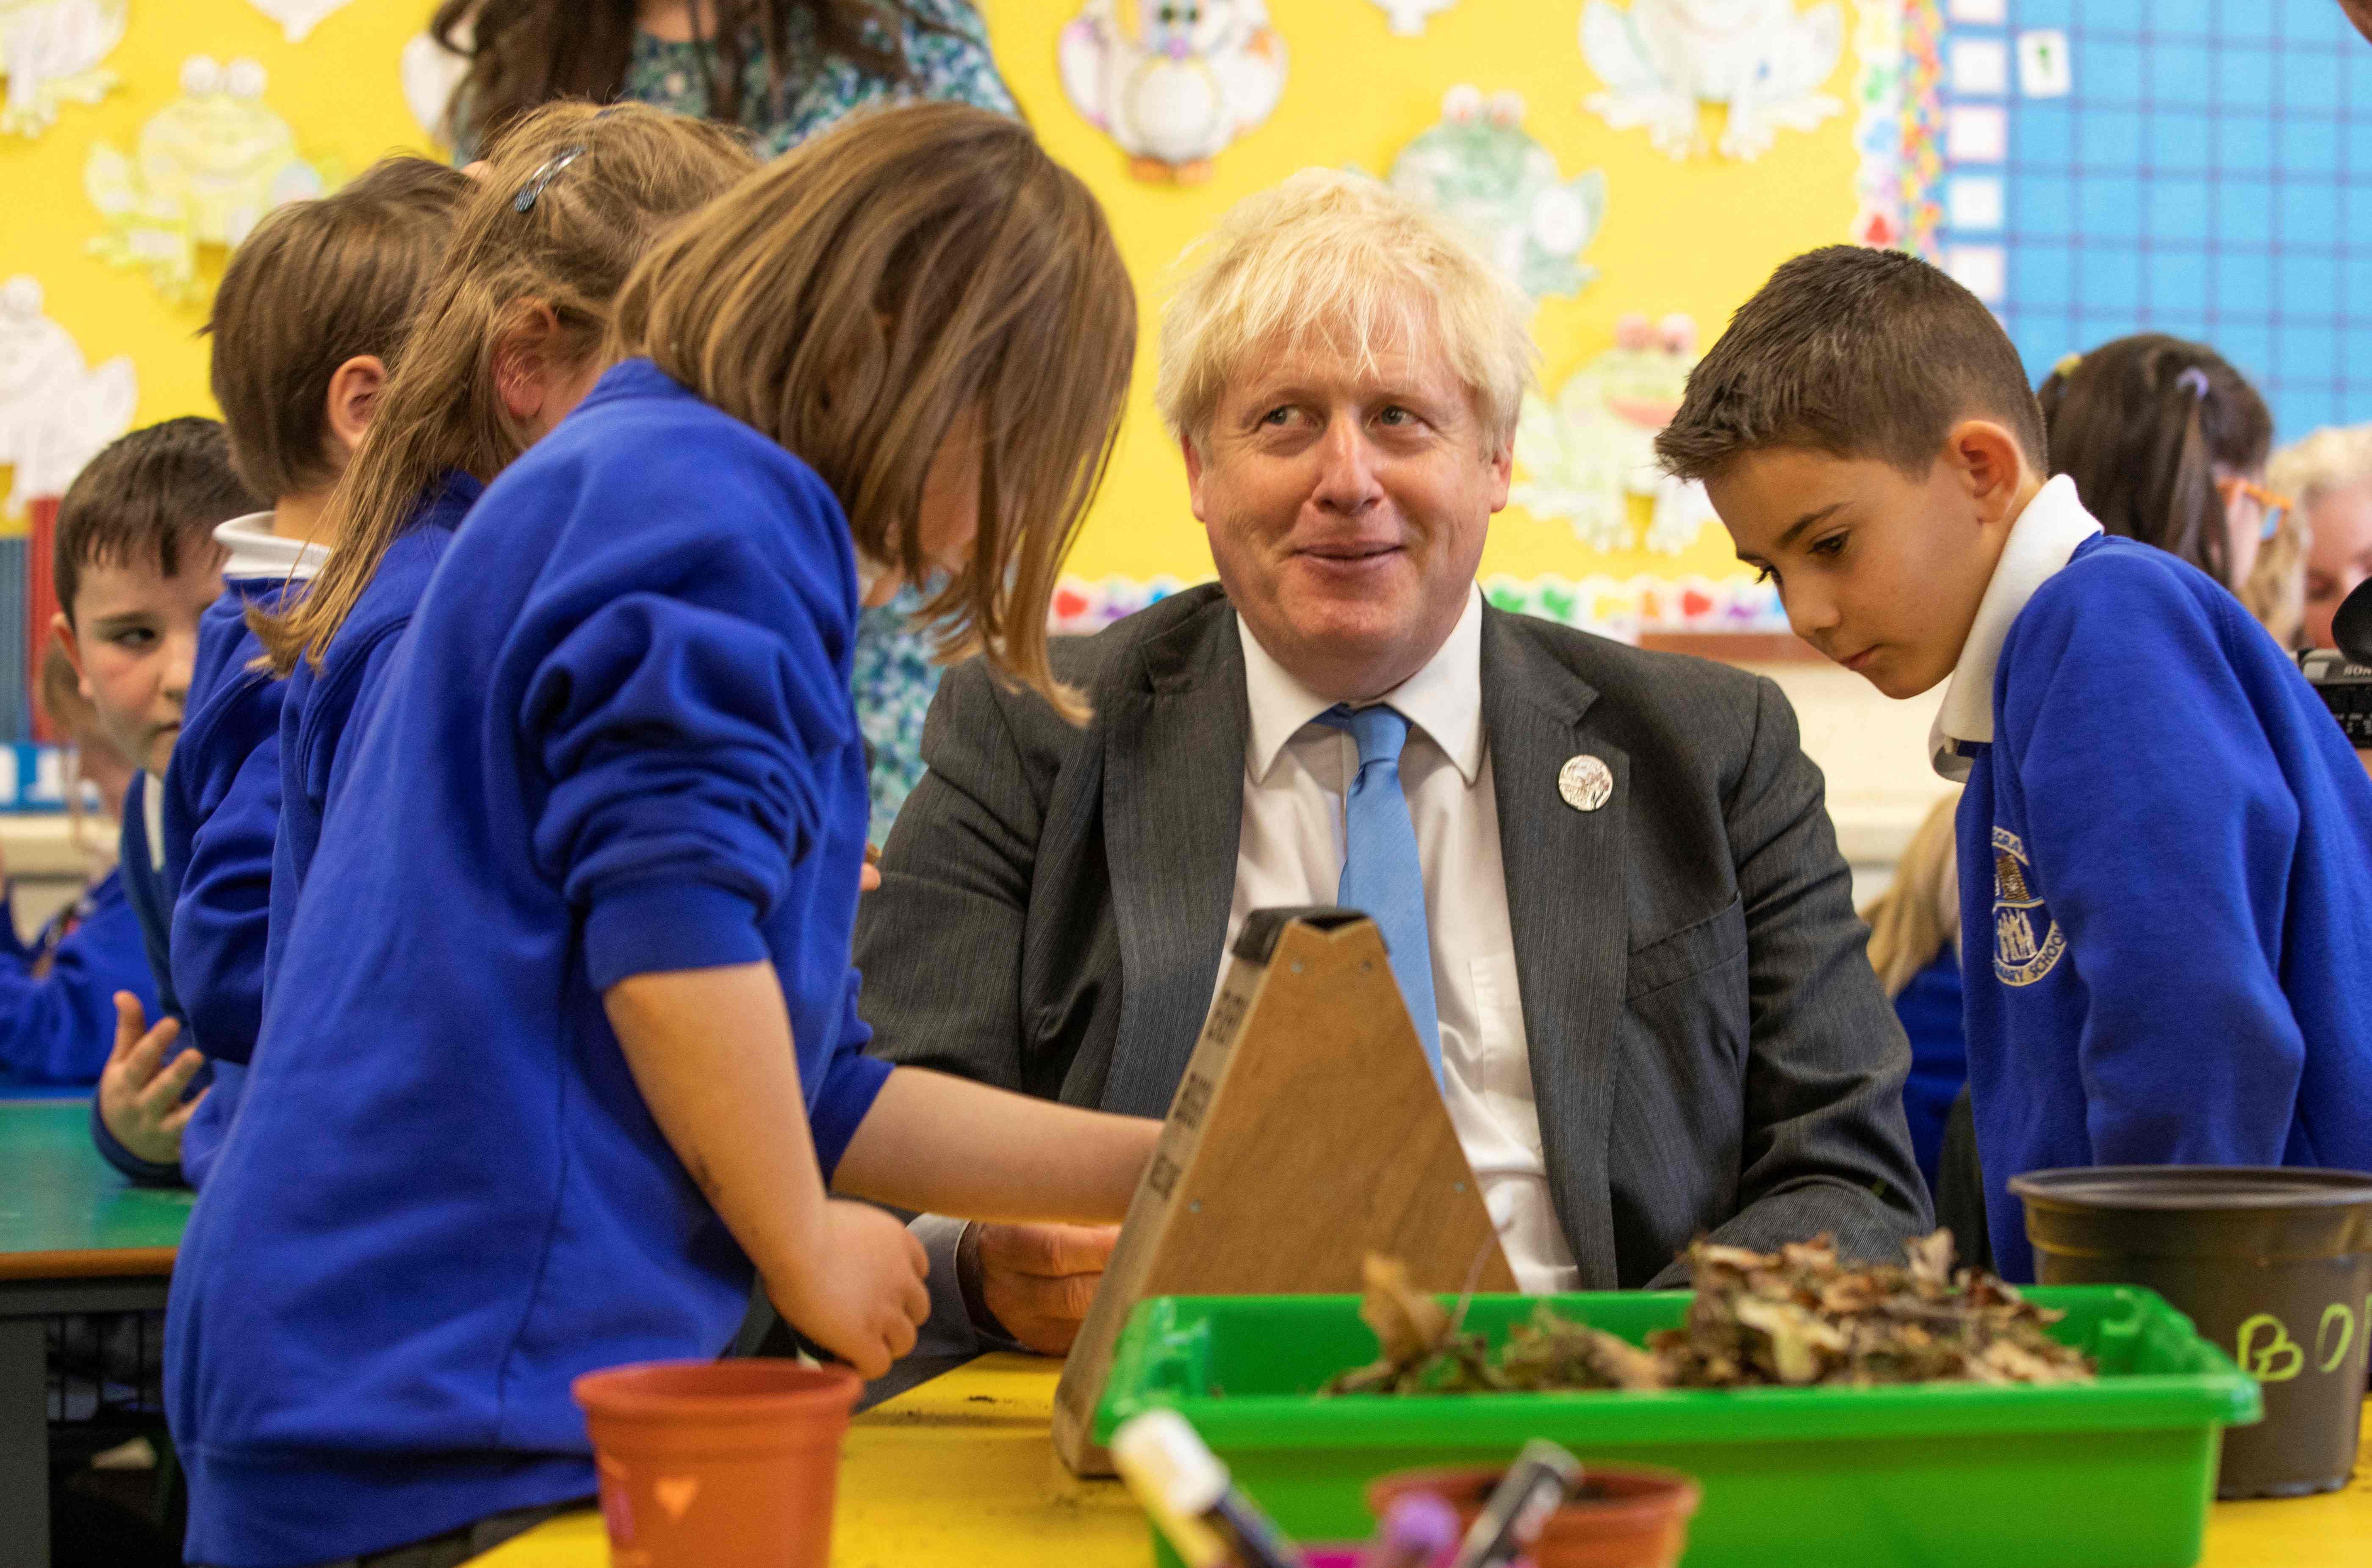 ‘It was only in the spring that Boris Johnson told his newly appointed catch up tsar that there was essentially no limit to his commitment to fix lost learning’